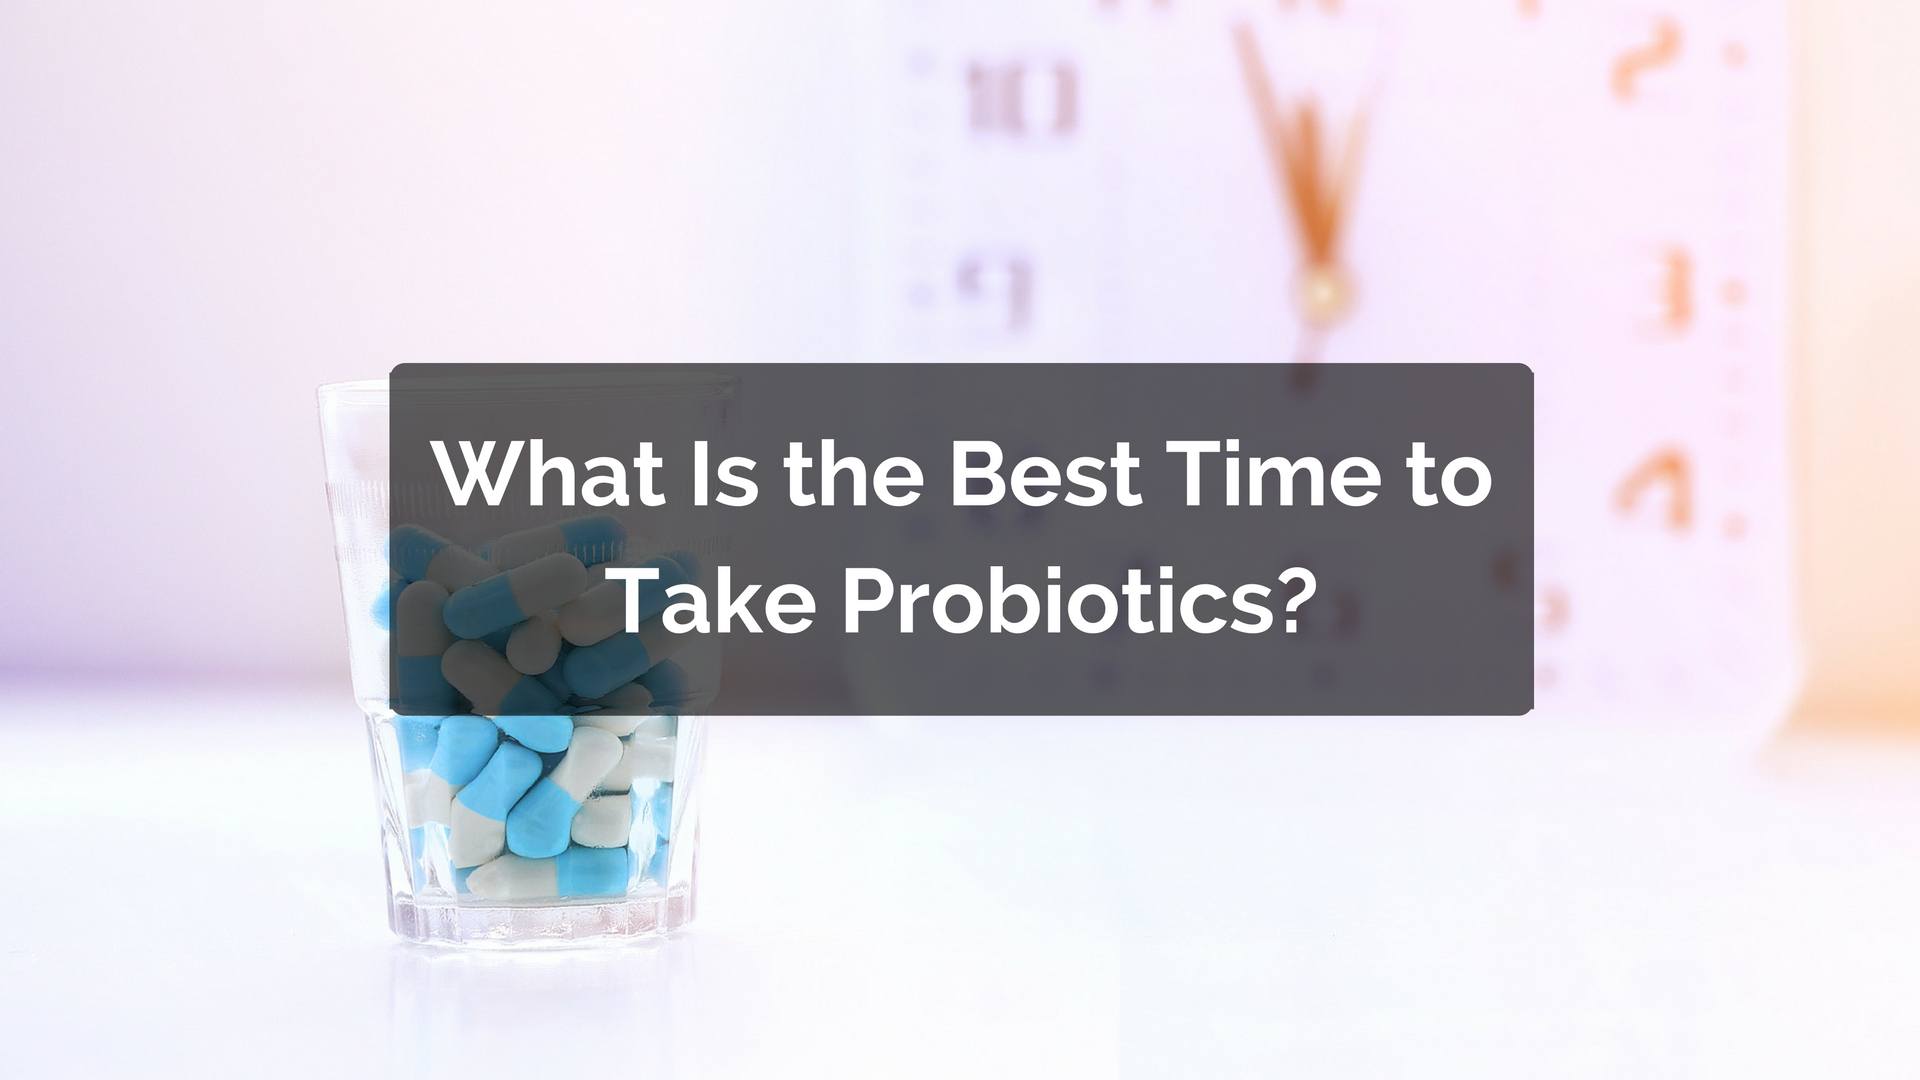 What is the Best Time to Take Probiotics?